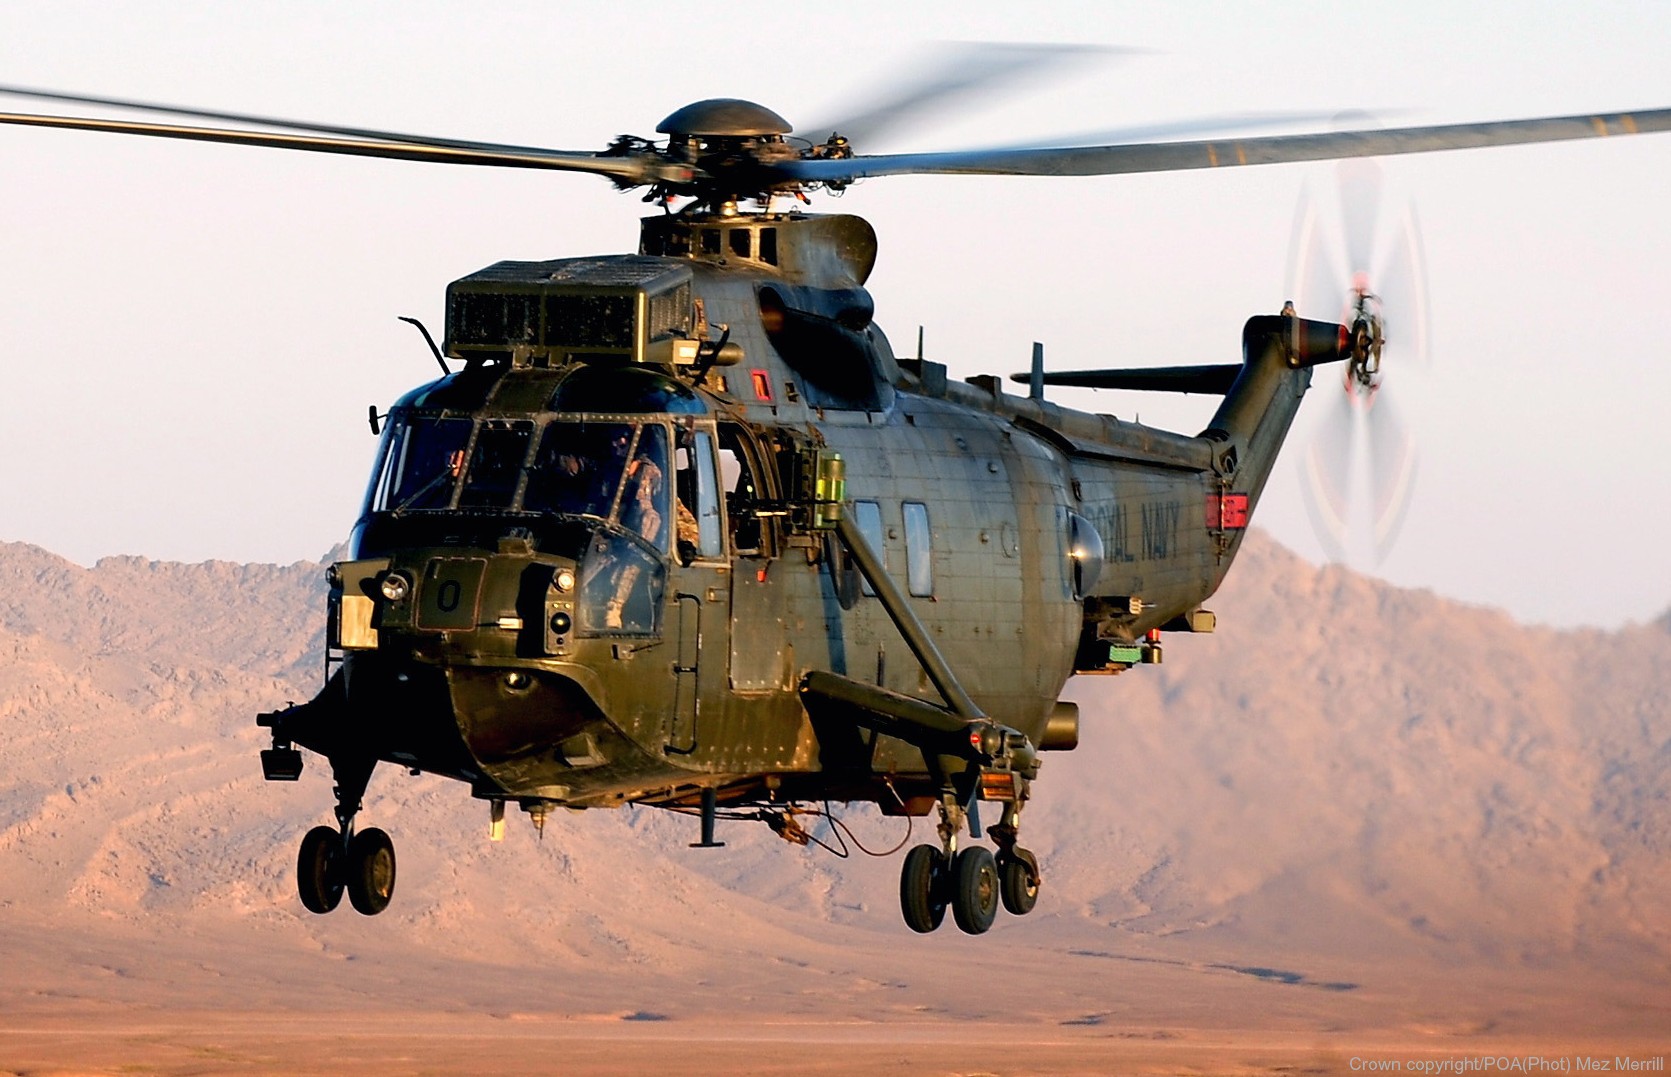 sea king hc.4 helicopter royal navy commando assault marines westland nas squadron rnas 42a helmand afghanistan